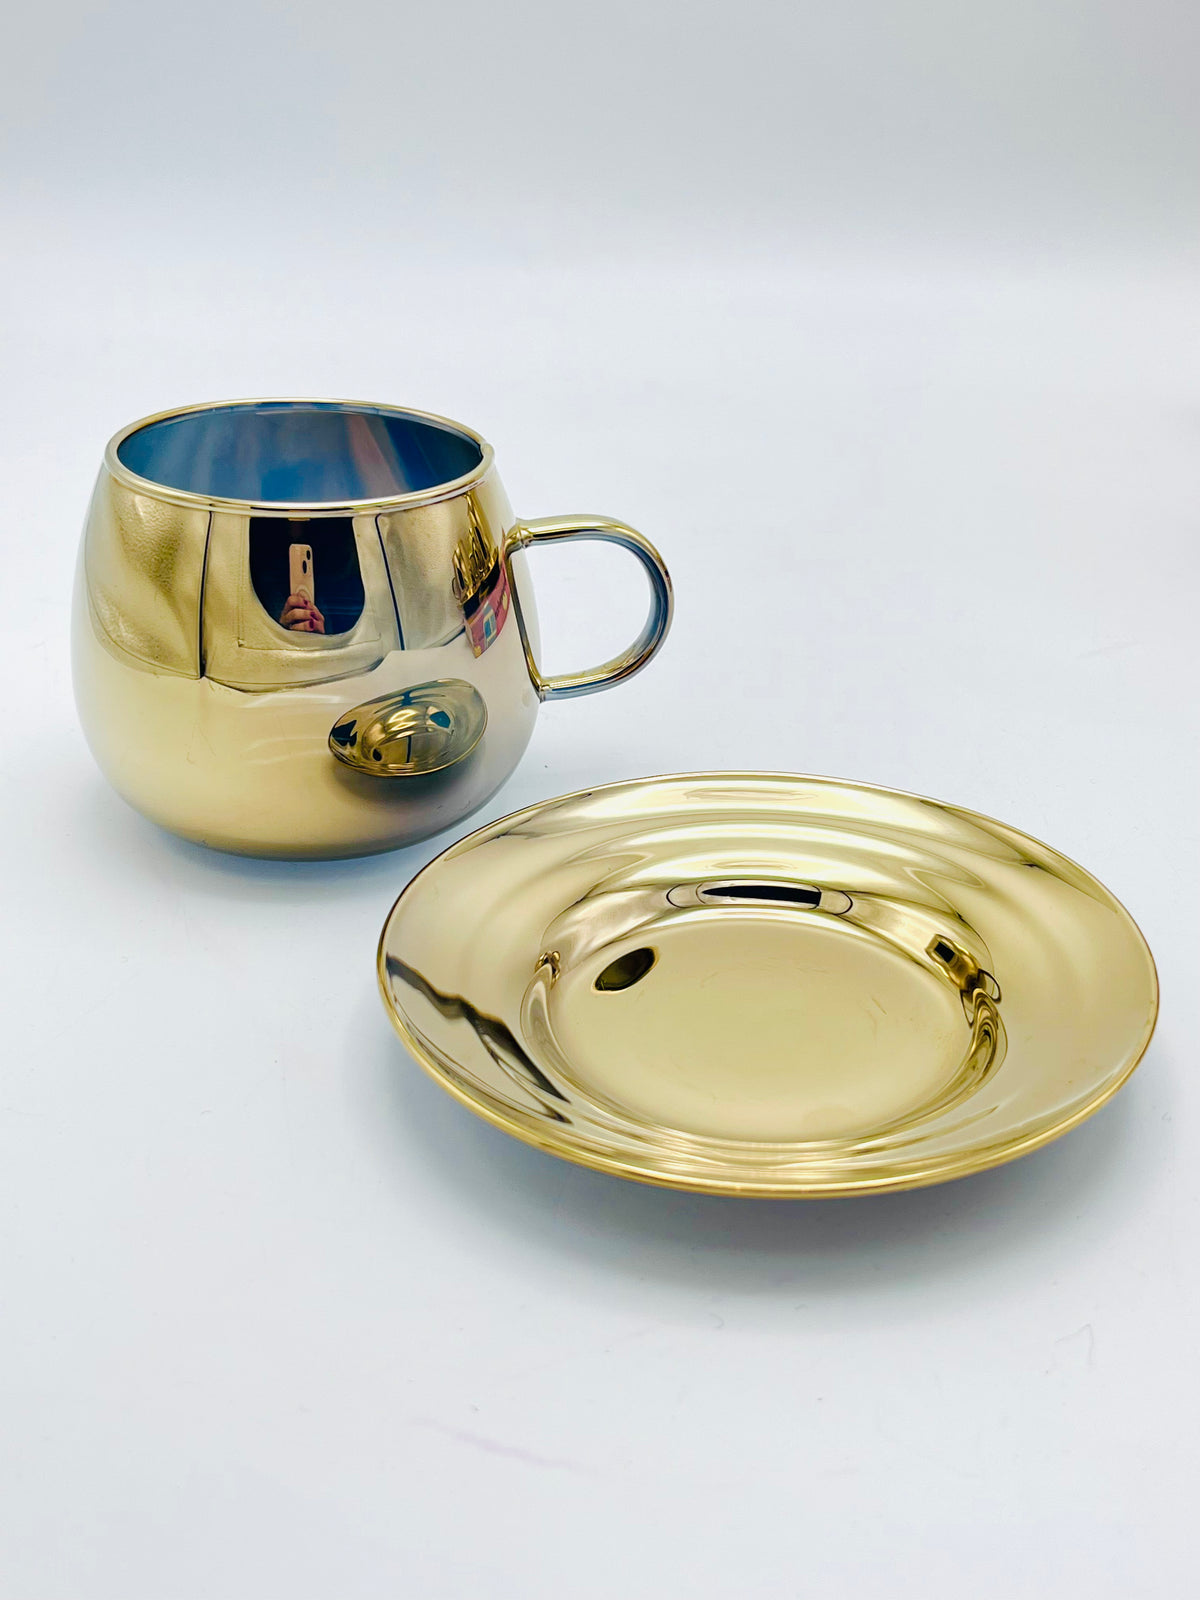 Vintage Mirrored Glass Cups and Saucers - 4pc Set